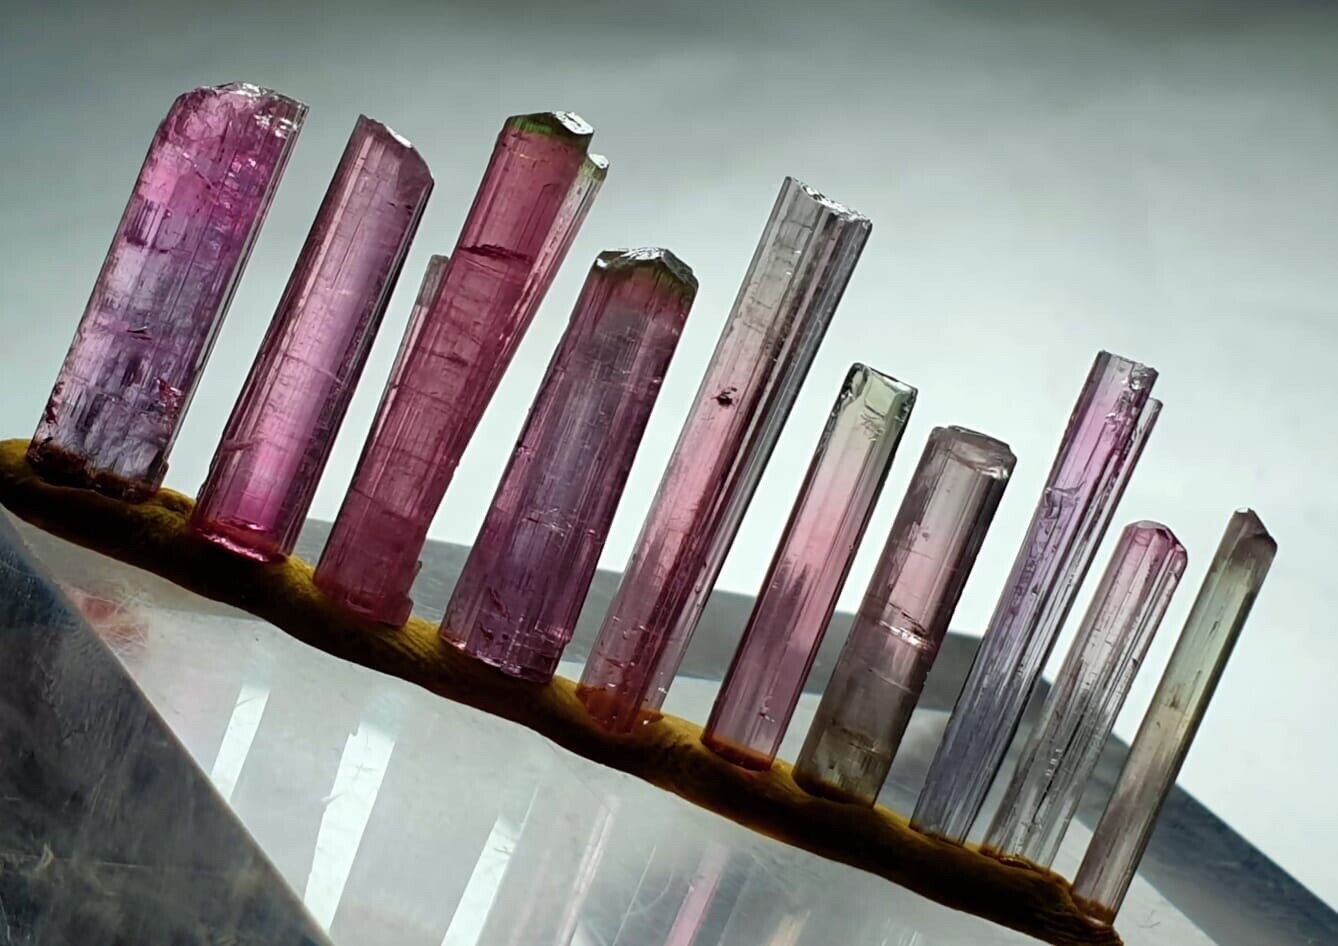 Top Bi Colour Terminated Tourmaline crystals From Afghanistan